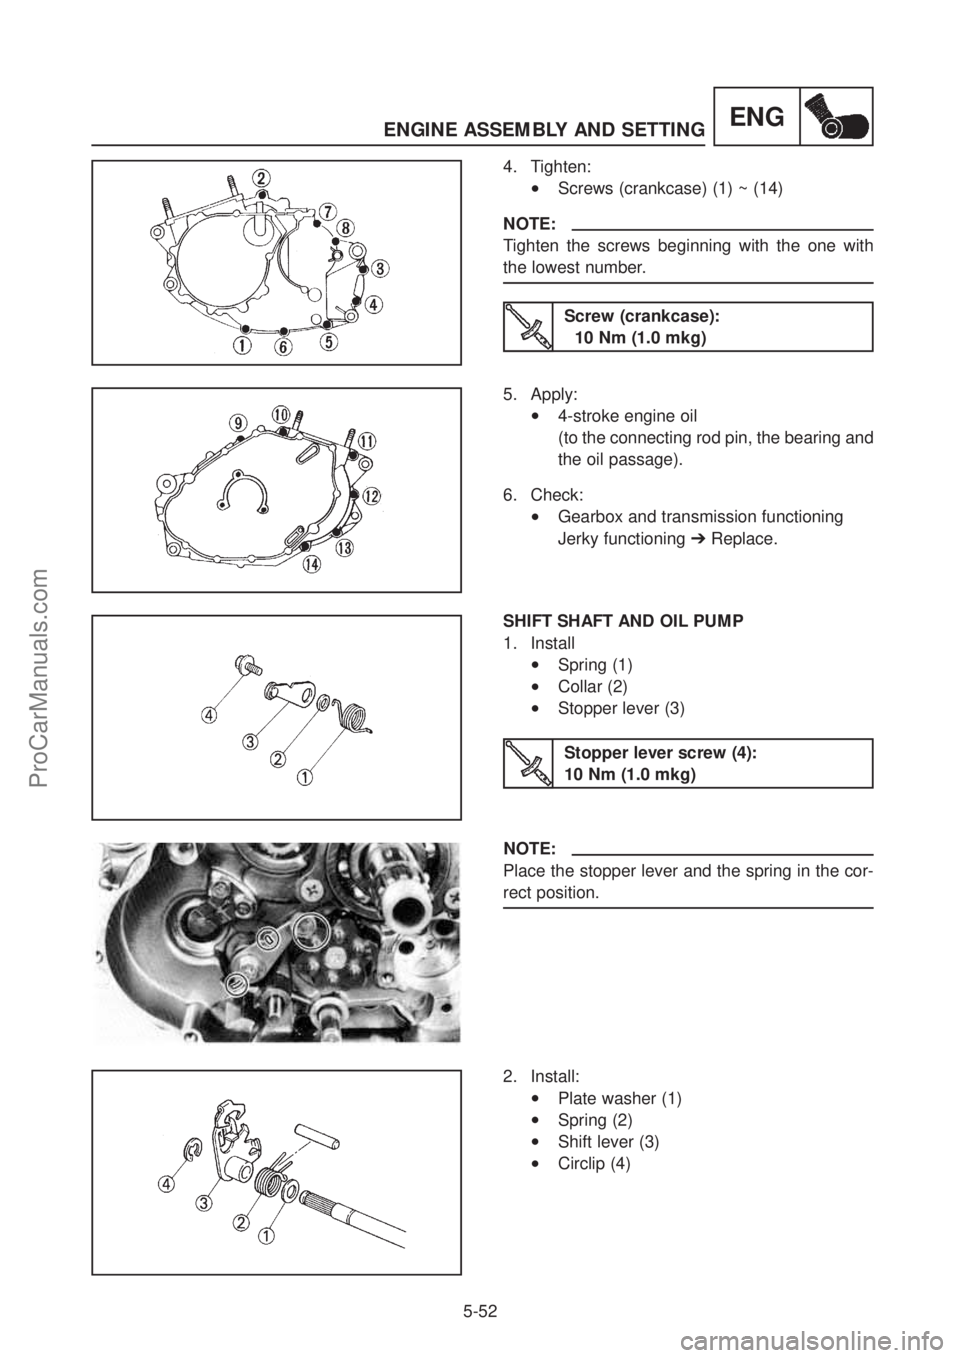 YAMAHA TT600RE 2004  Service Manual ENGINE ASSEMBLY AND SETTING 
5-52
ENG
4. Tighten: 
•Screws (crankcase) (1) ~ (14) 
NOTE:
Tighten the screws beginning with the one with
the lowest number. 
Screw (crankcase): 10 Nm (1.0 mkg)
Stopper